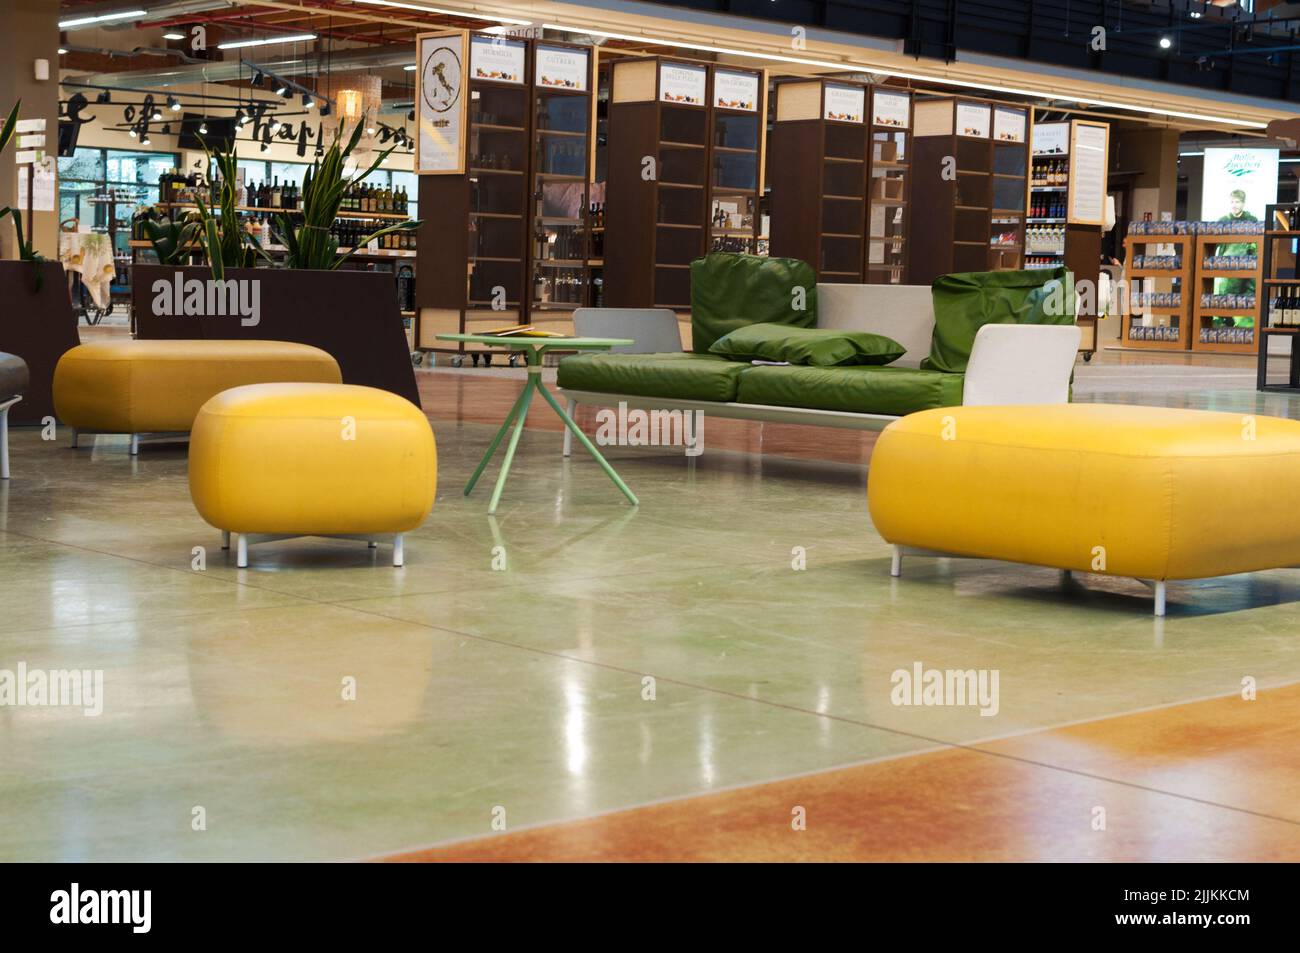 The interior of a building with yellow sofas Stock Photo